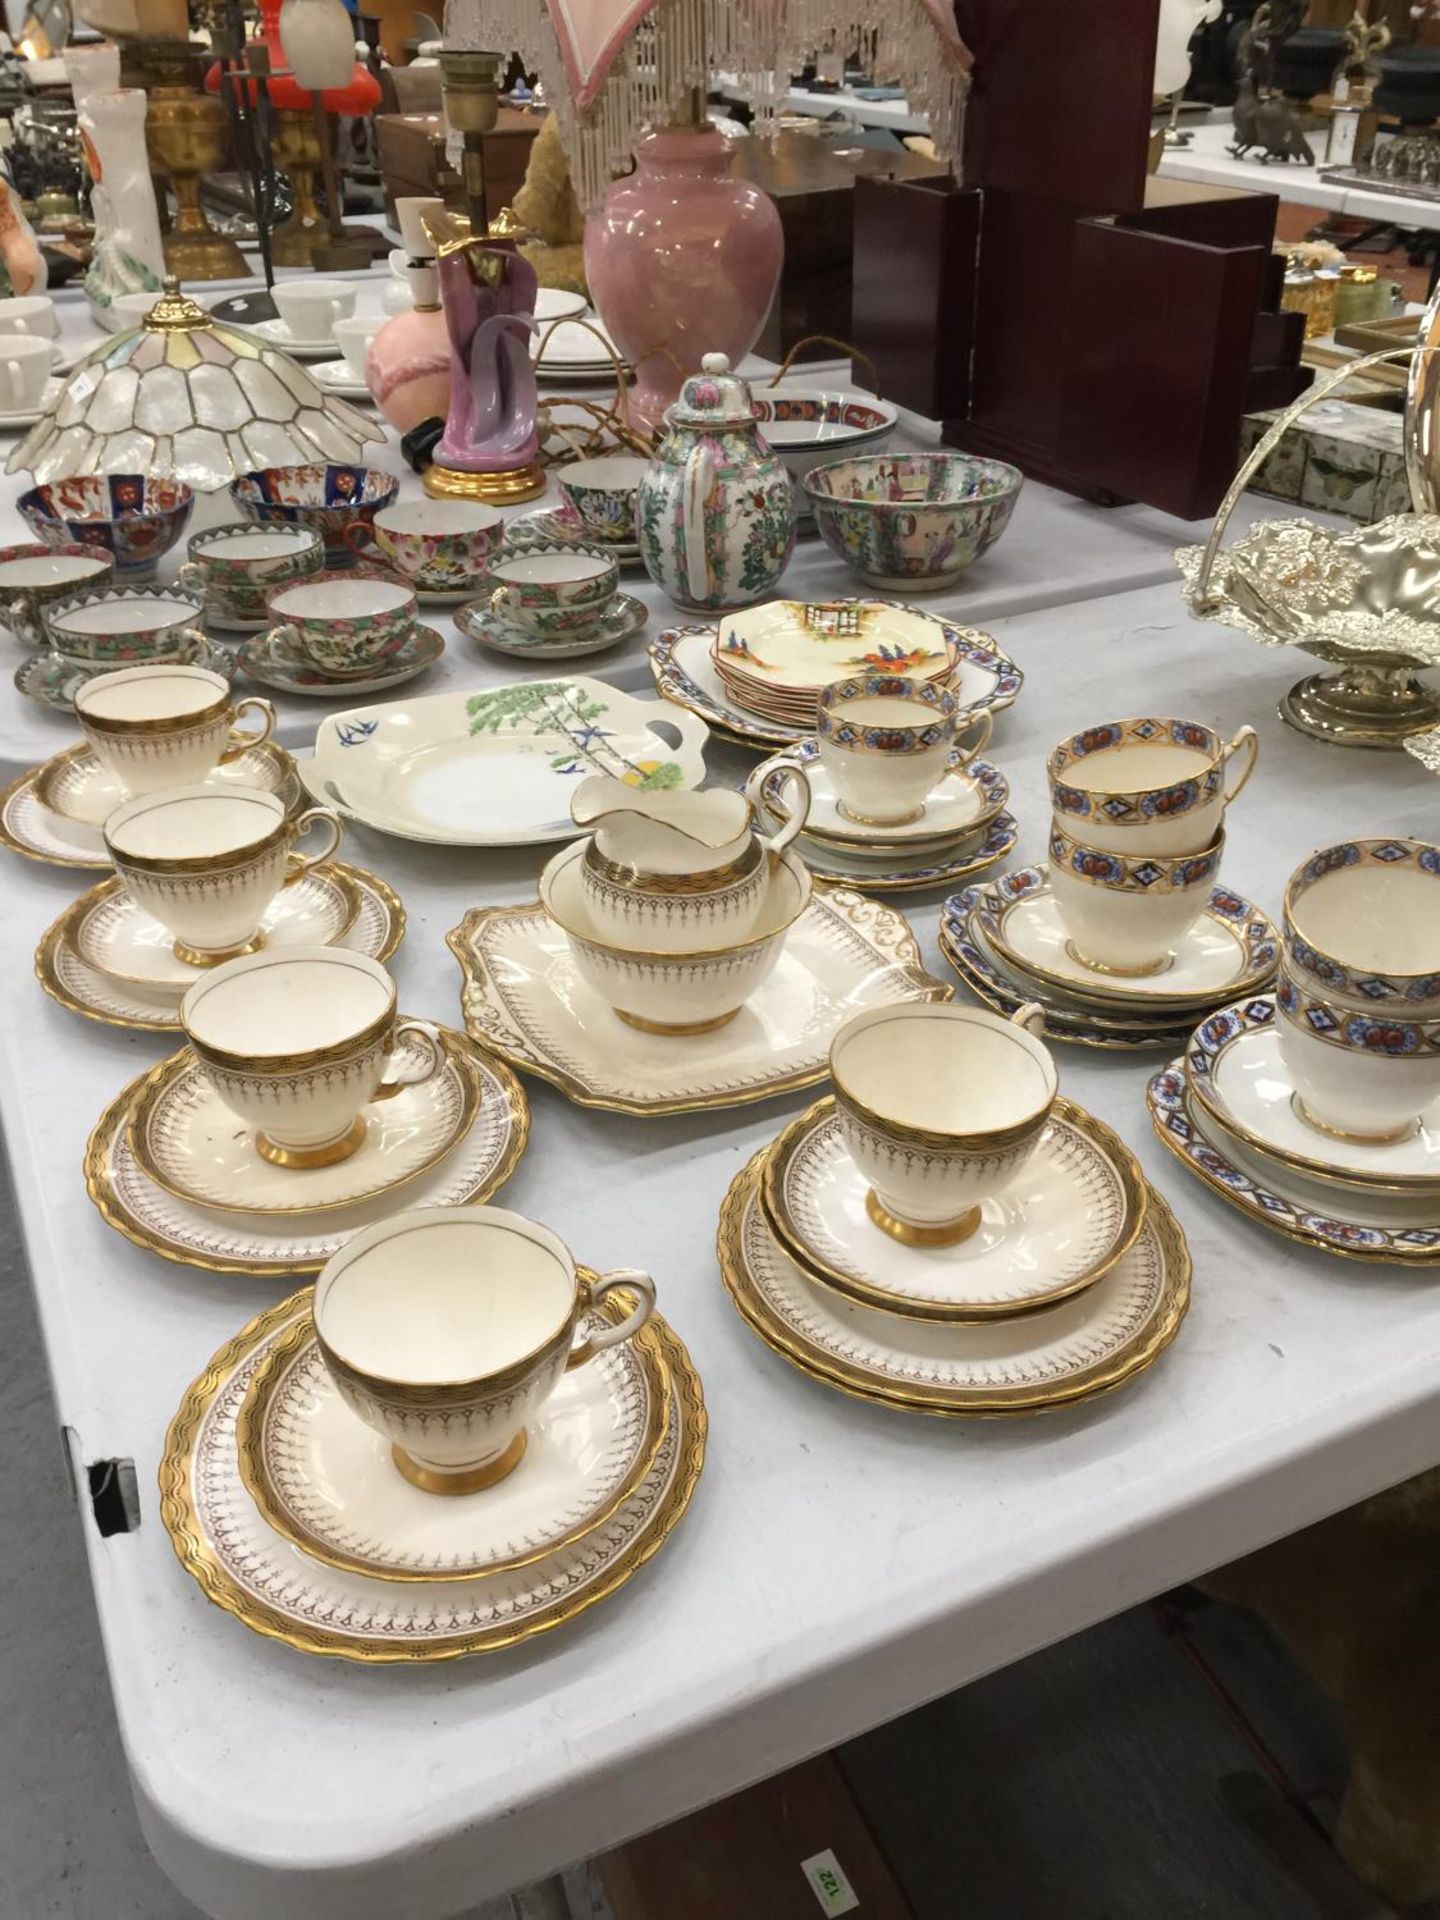 A QUANTITY OF TEAWARE TO INCLUDE TUSCAN CHINA GILT DECORATED TEACUPS, SAUCERS, PLATES, ETC, PLUS - Image 2 of 5